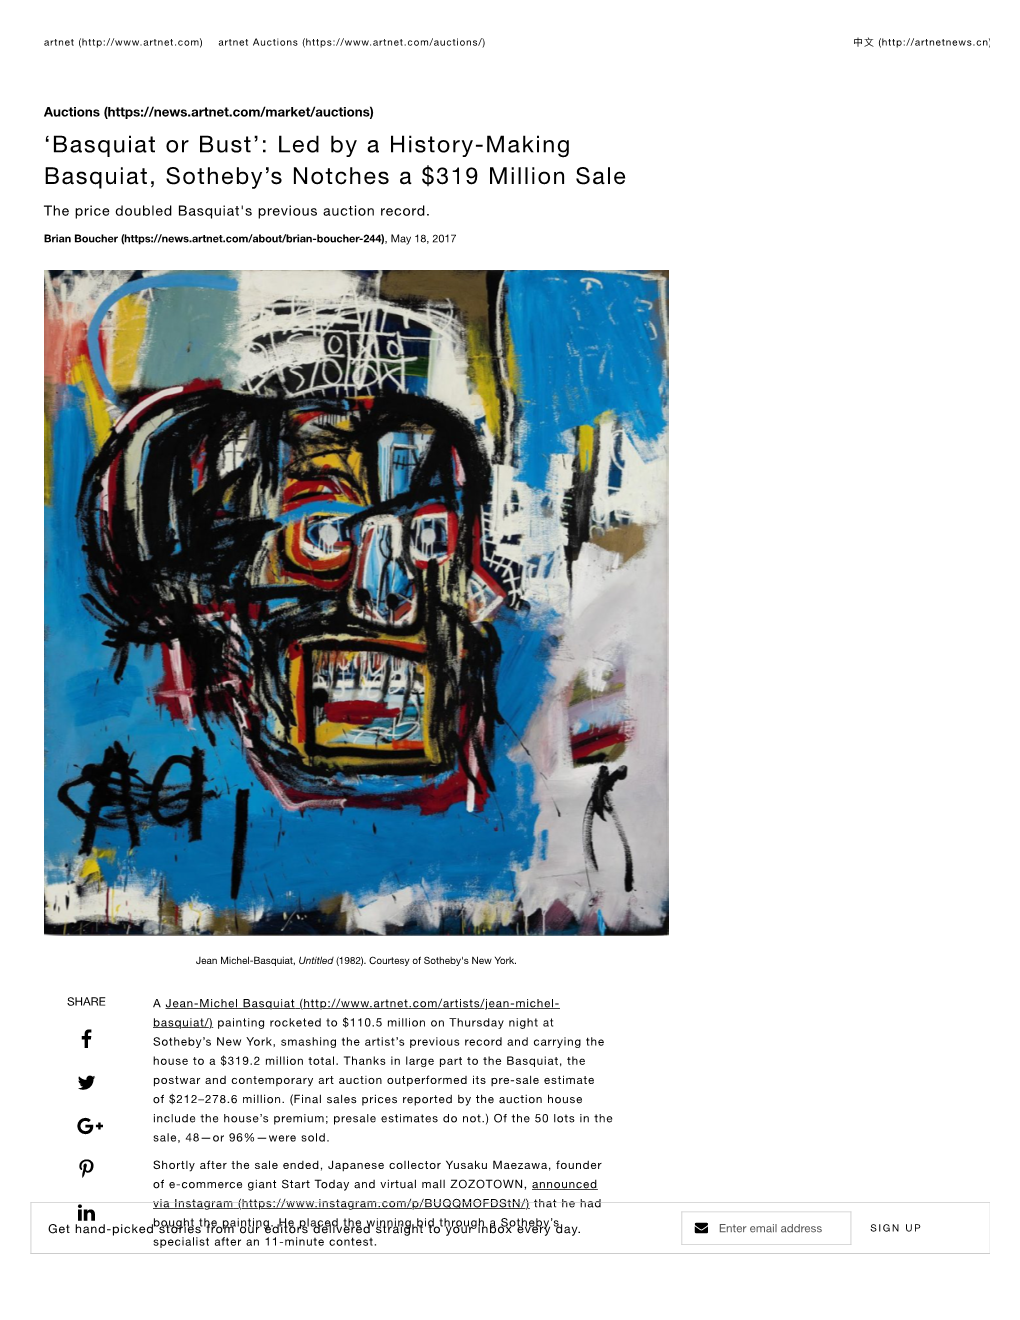 Basquiat Or Bust’: Led by a History-Making Basquiat, Sotheby’S Notches a $319 Million Sale